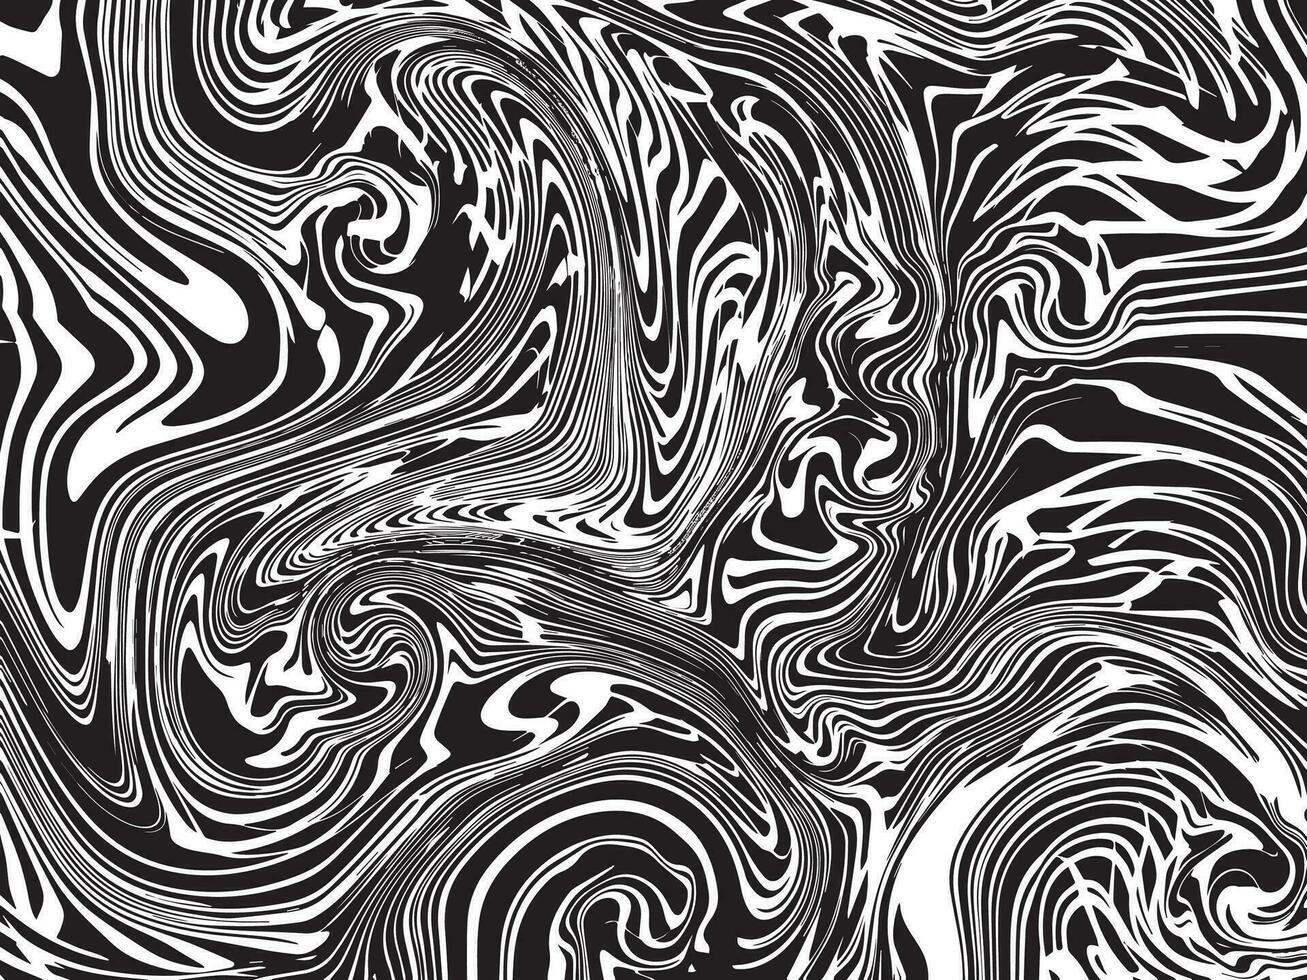 Swirling wavy abstract black brush strokes decorative vector background isolated on white landscape wallpaper. Simple flat abstract black and white monochrome backdrop.